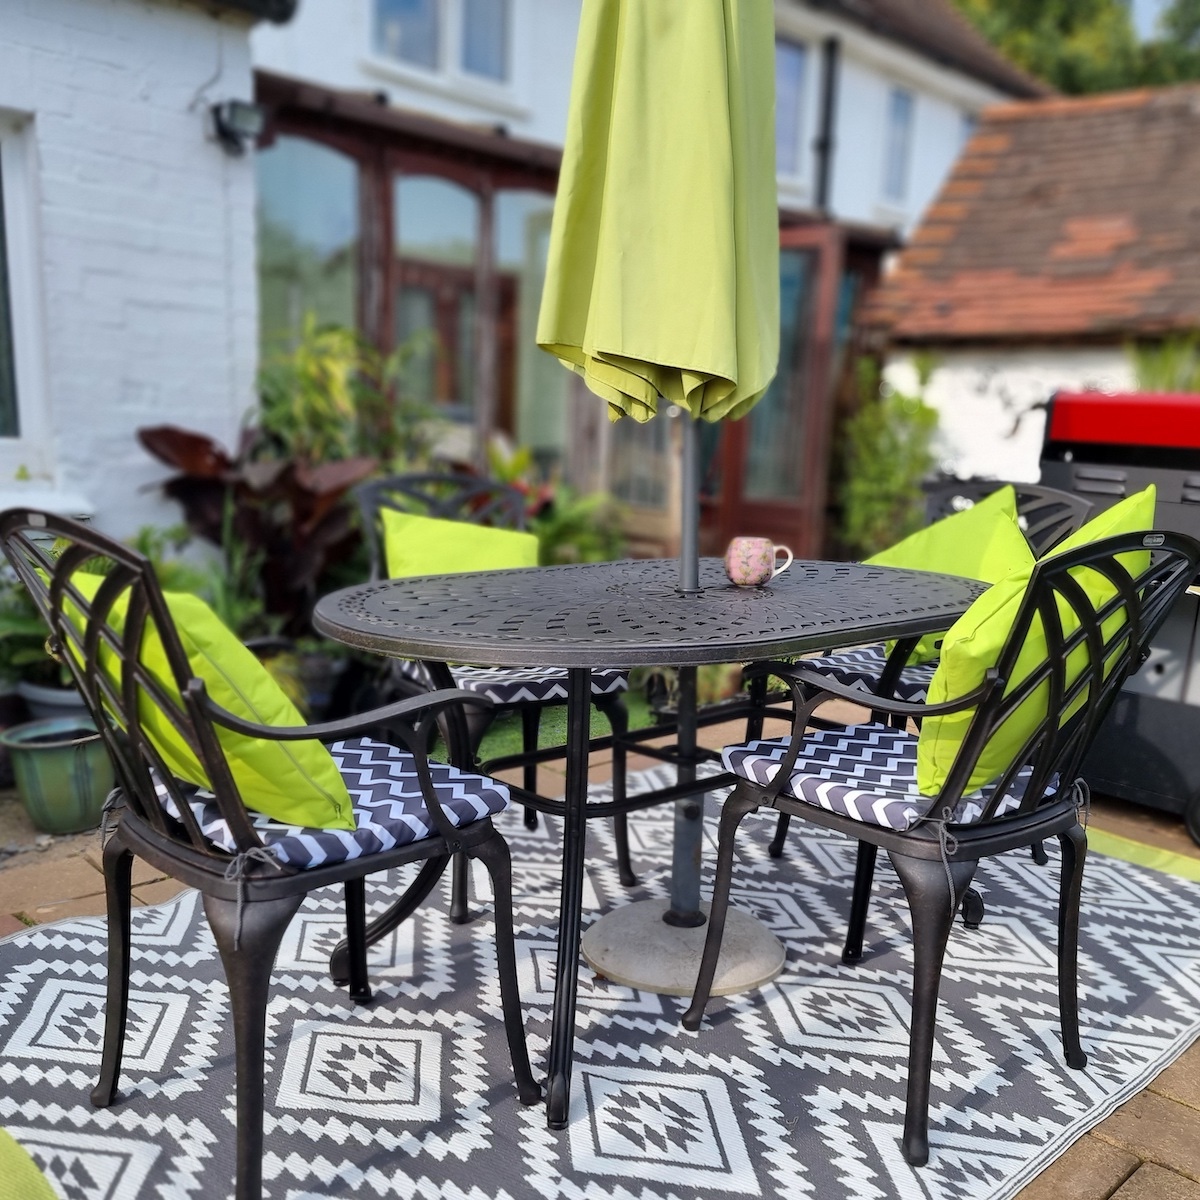 How to style our black garden furniture in your garden space